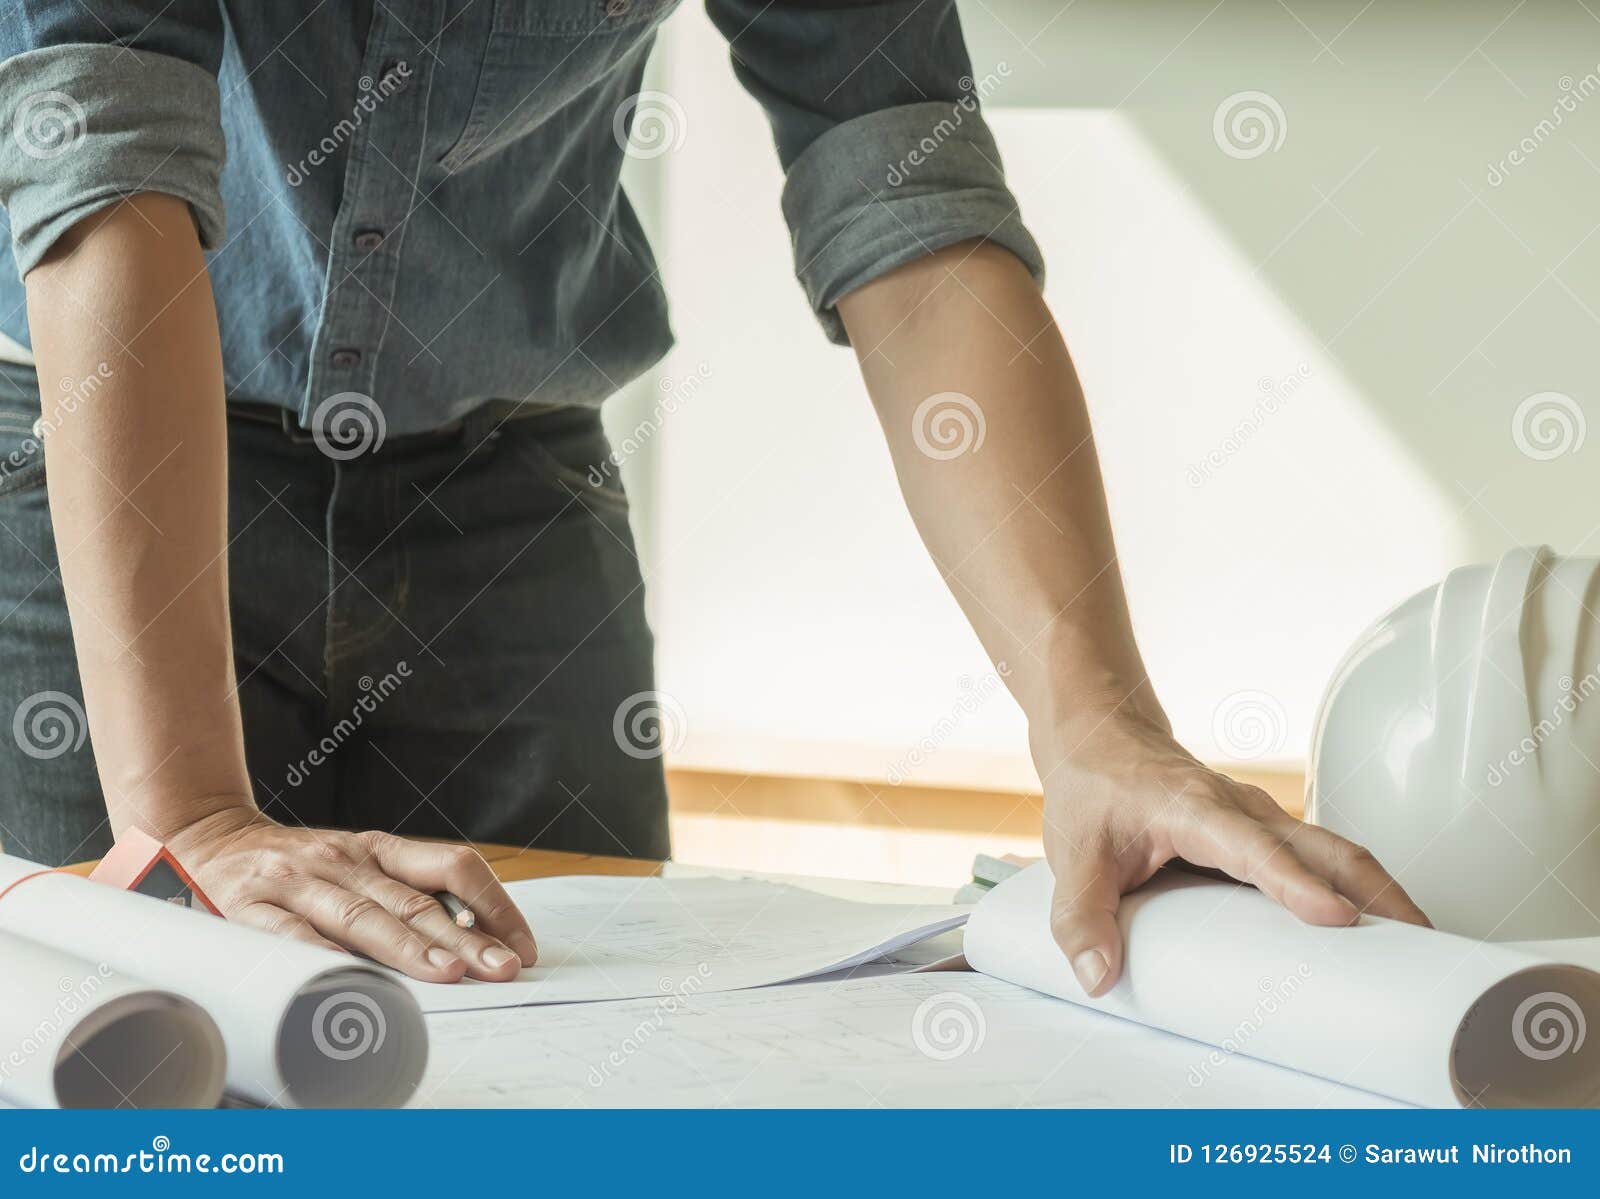 Architects Looking At Home Plans Stock Photo Image Of Plans